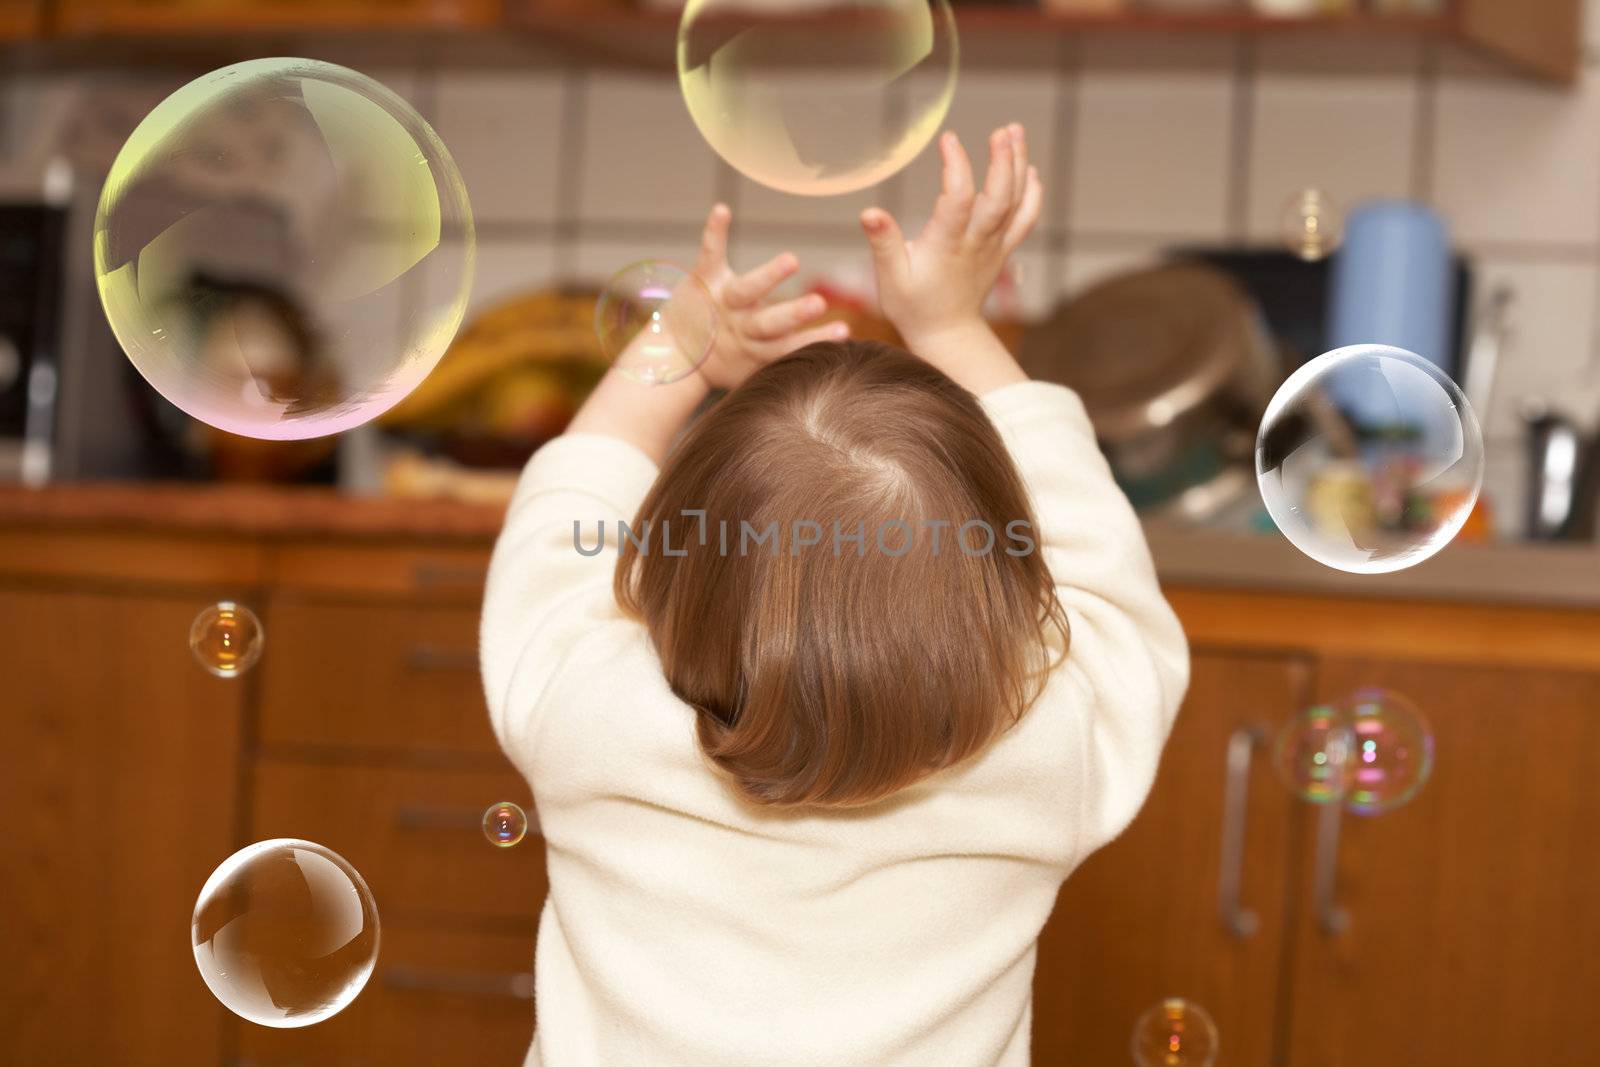 The small girl plays with soap bubbles by petrkurgan